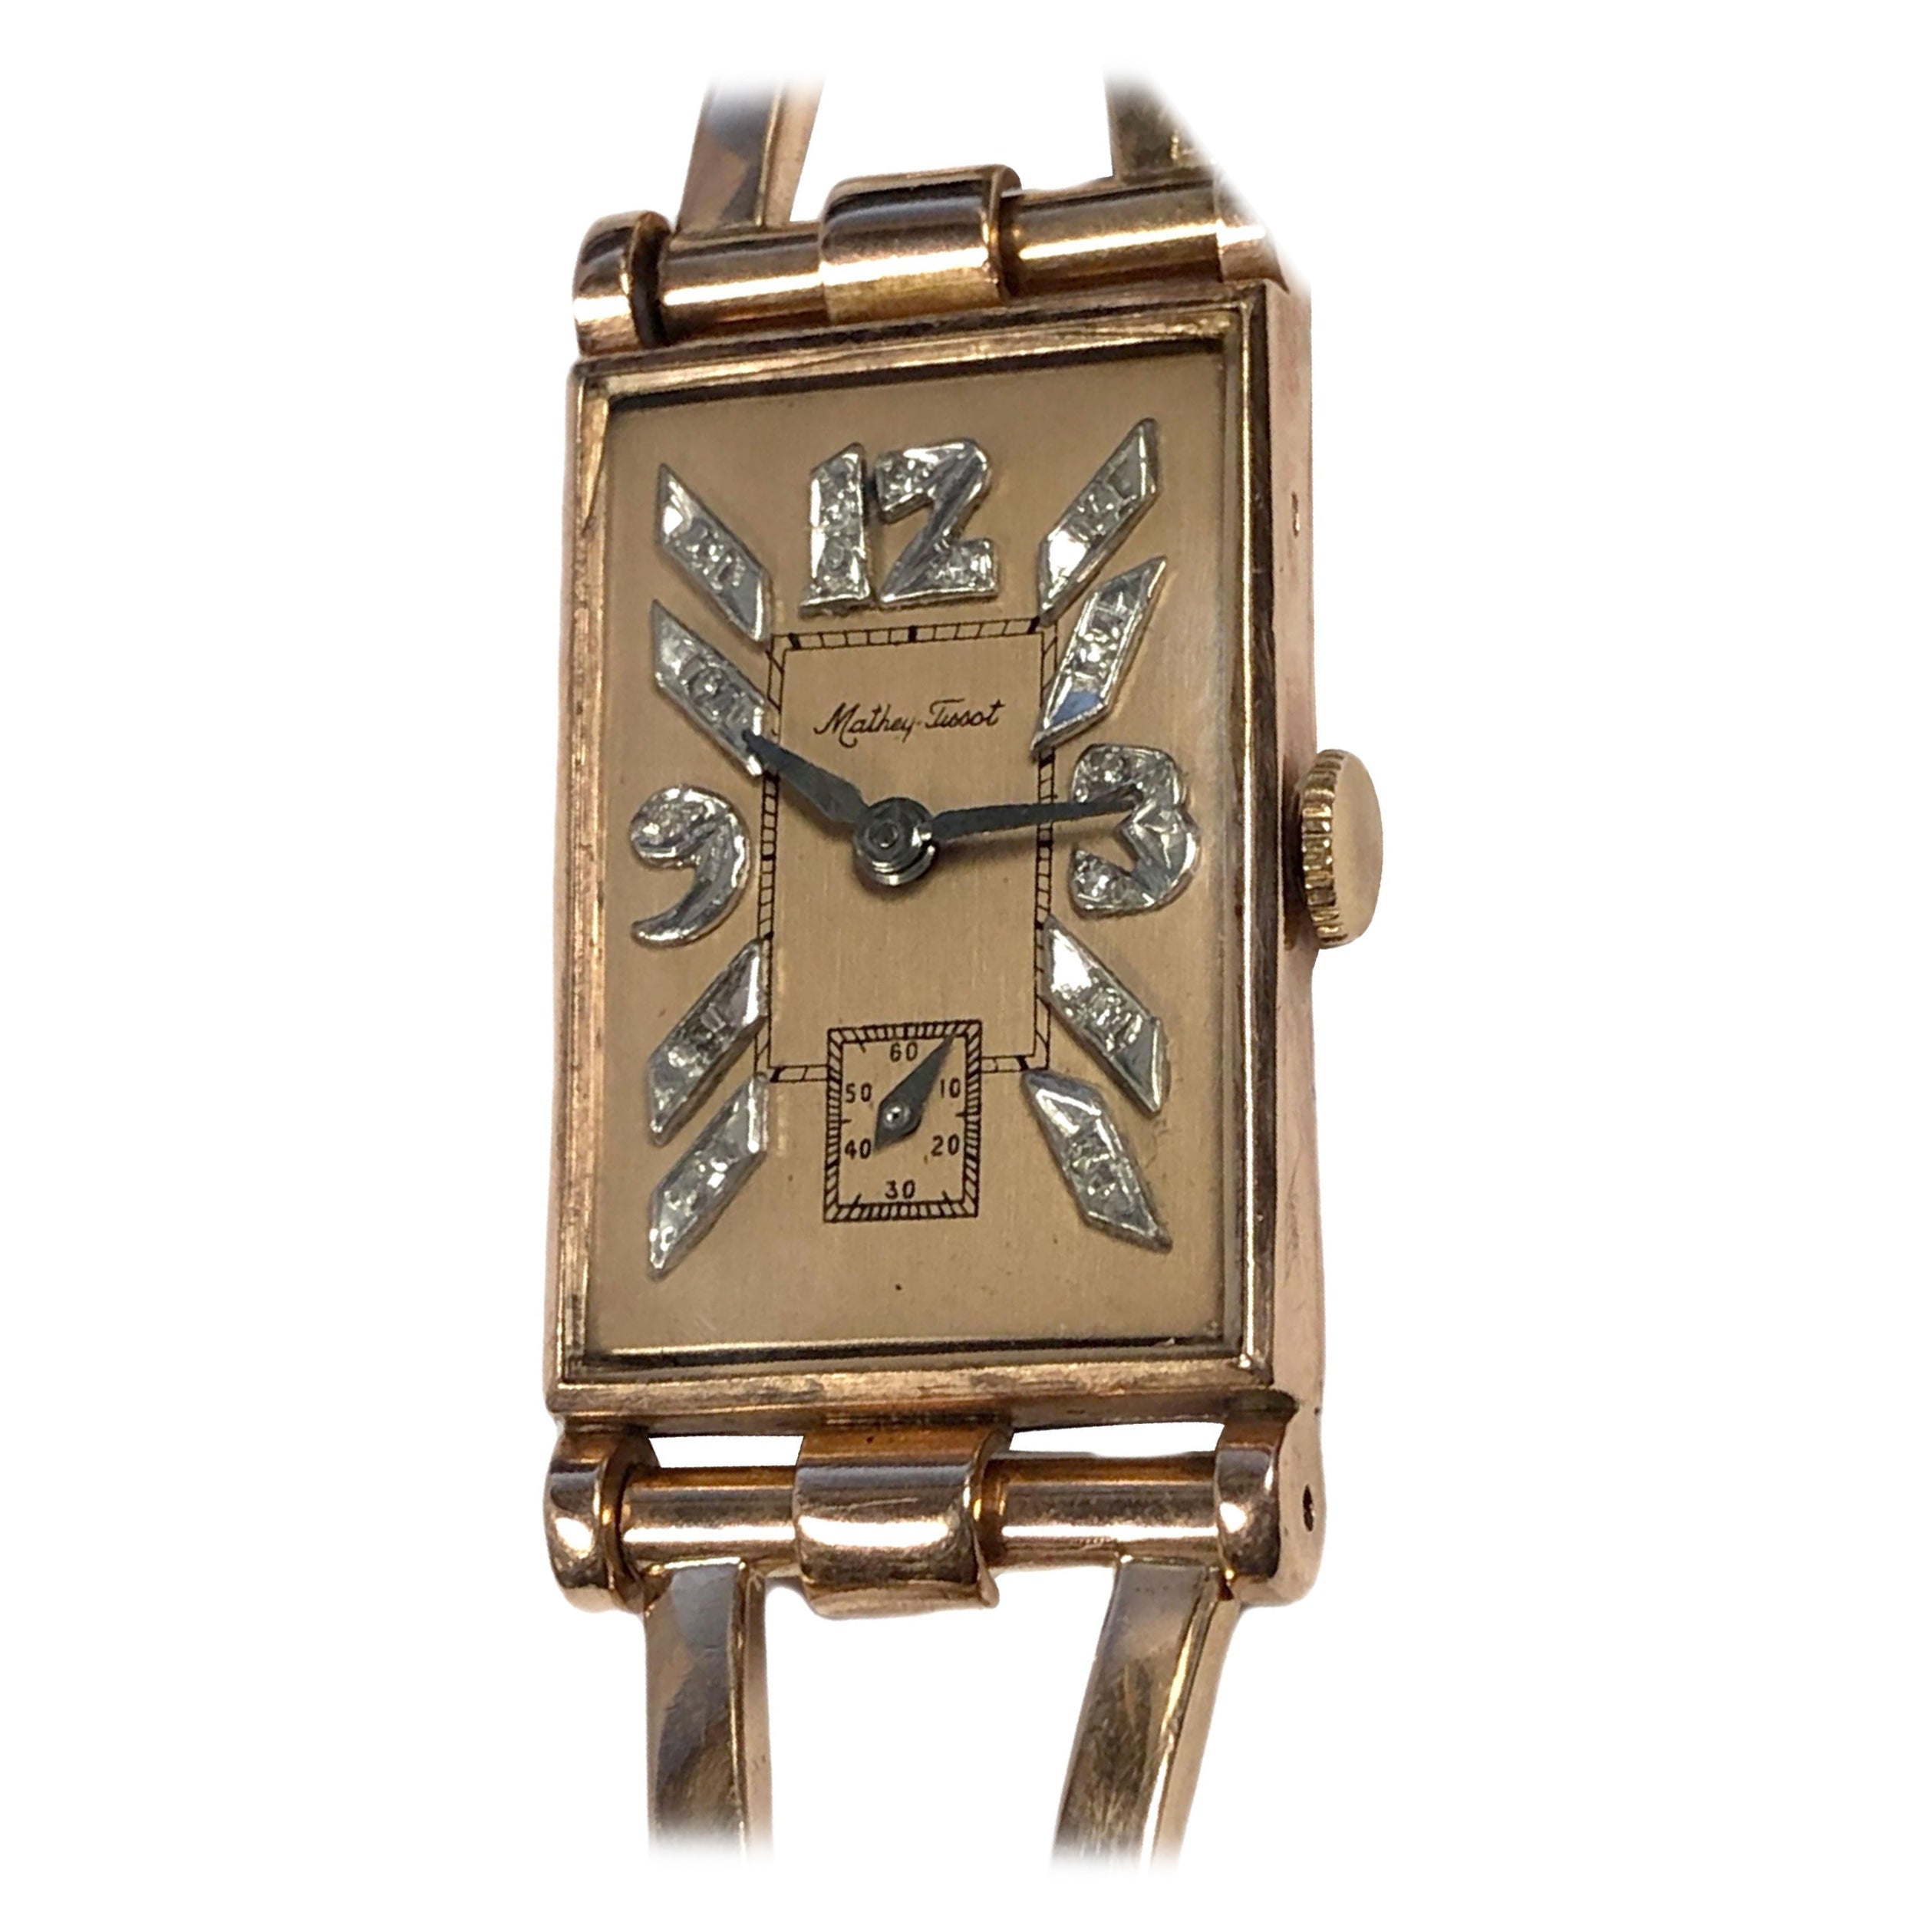 Circa 1940s Mathey Tissot Wrist Watch, 38 M.M. X 20 M.M. Rectangular 14K Rose Gold 2 piece case, 17 Jewel Mechanical Manual wind nickle lever movement, Rose Gold dial with Raised Diamond set White Gold markers.  1/2 inch wide 14k Rose Gold Link